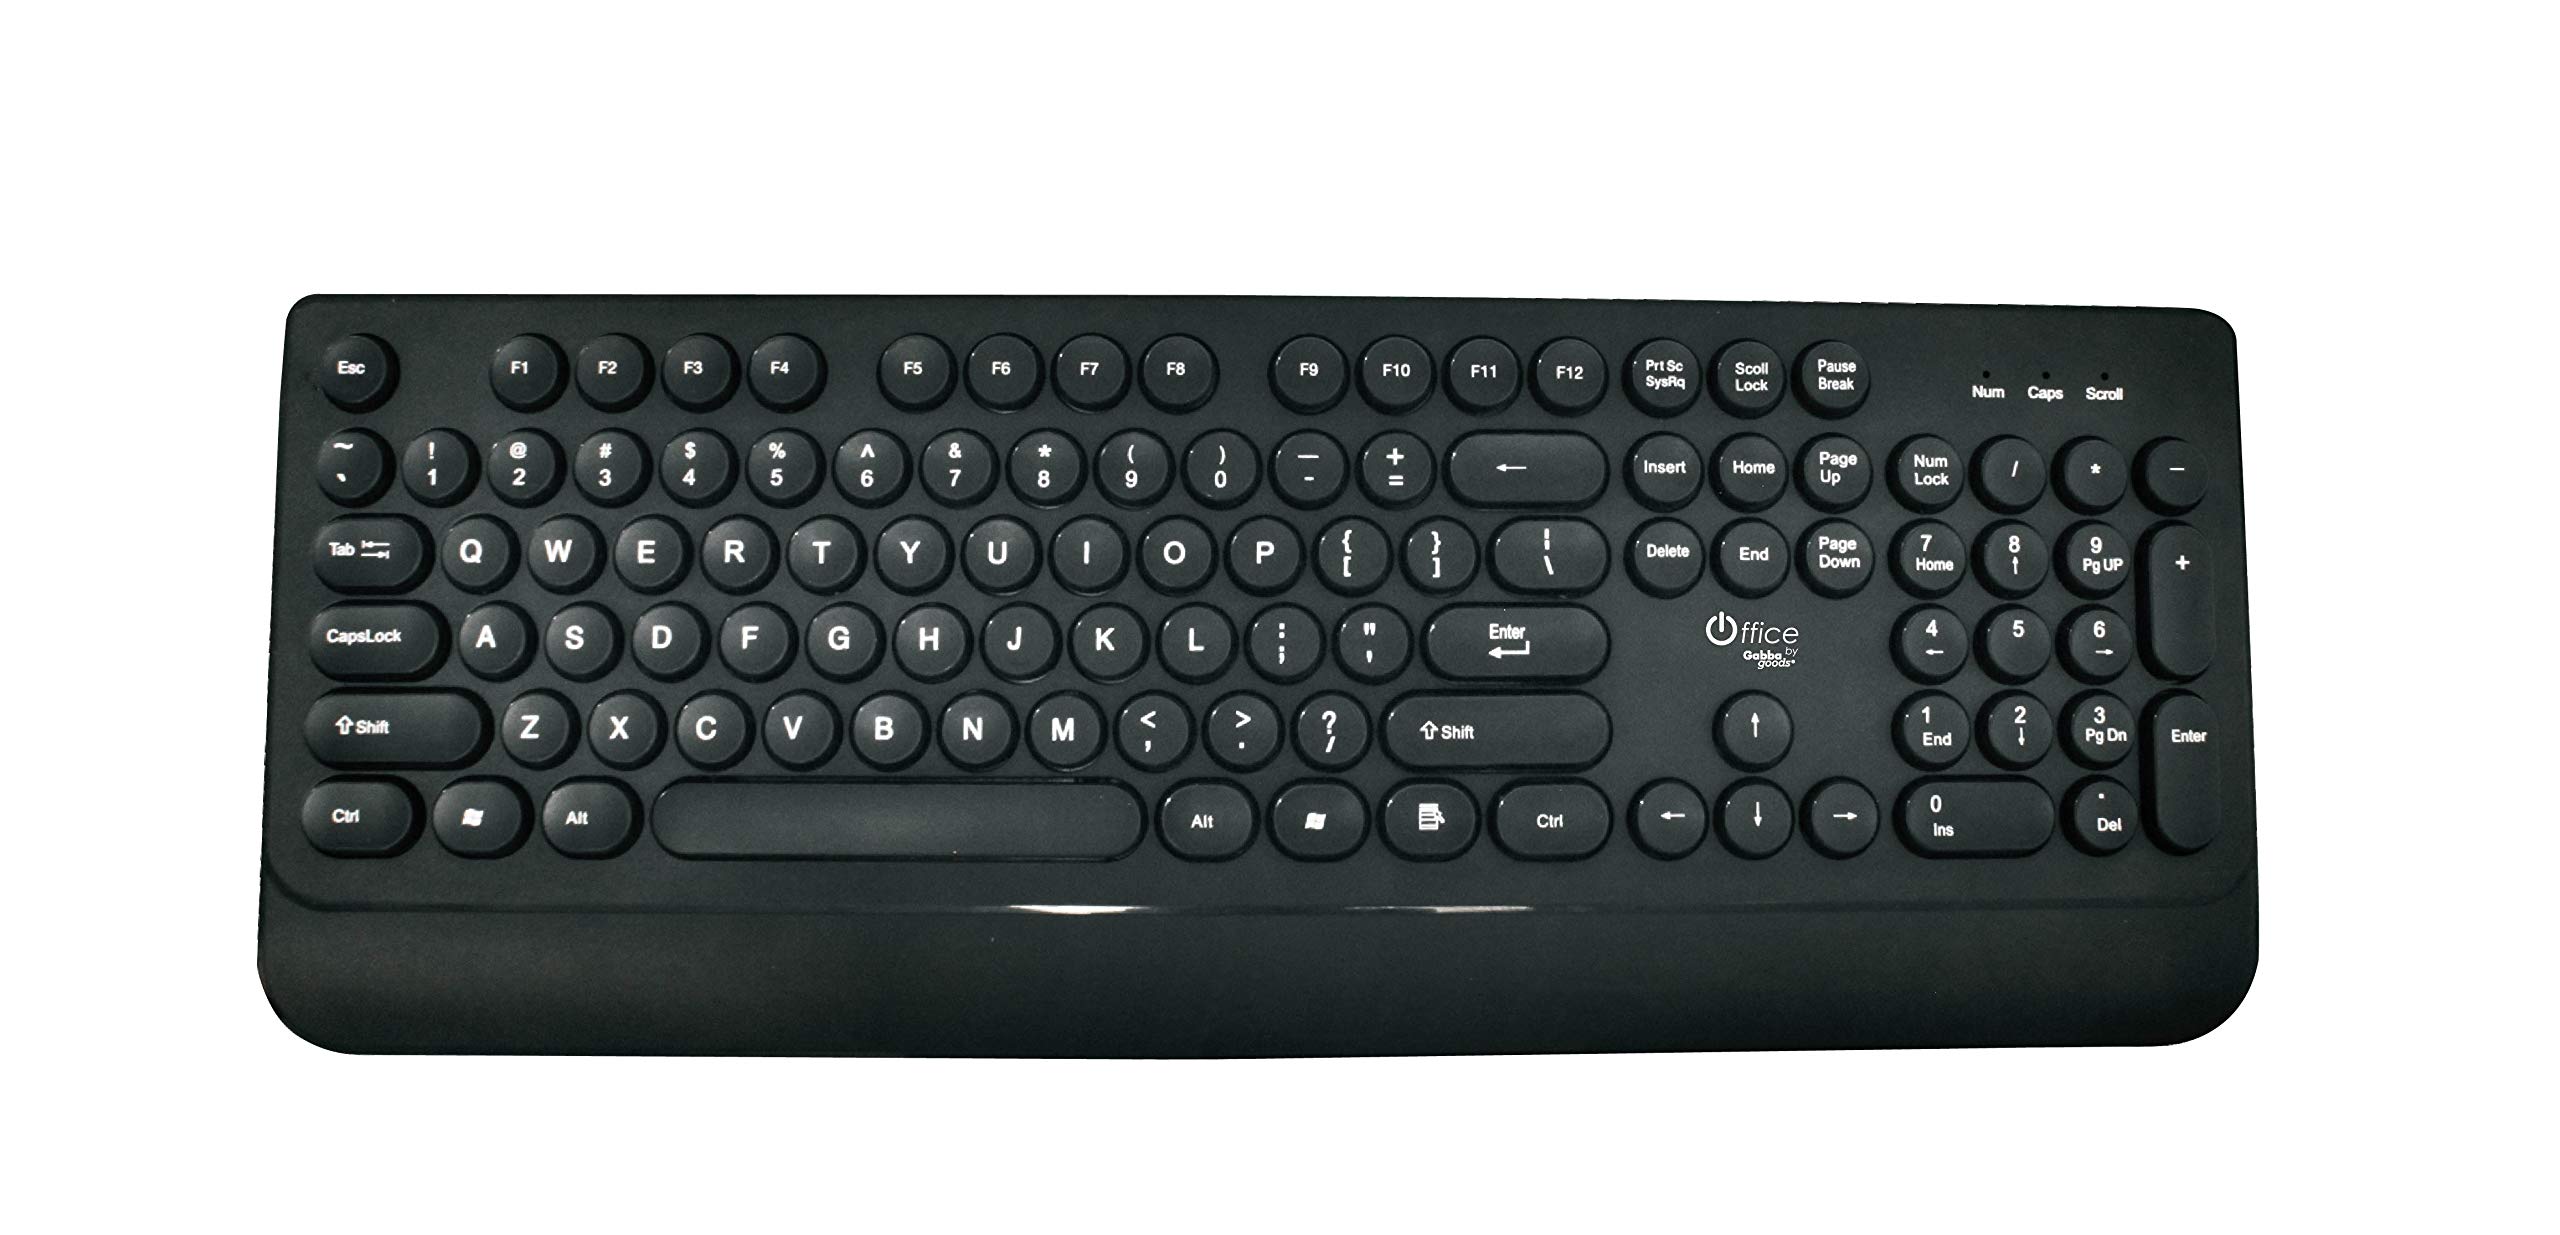 Gabba Goods Wireless Keyboard and Mouse Combo CB3 Full-Size Keyboard Layout with Number Pad, Ergonomic Mouse and Wireless 2.4Ghz Connection with Included Nano USB Receiver, Comfortable Palm Rest